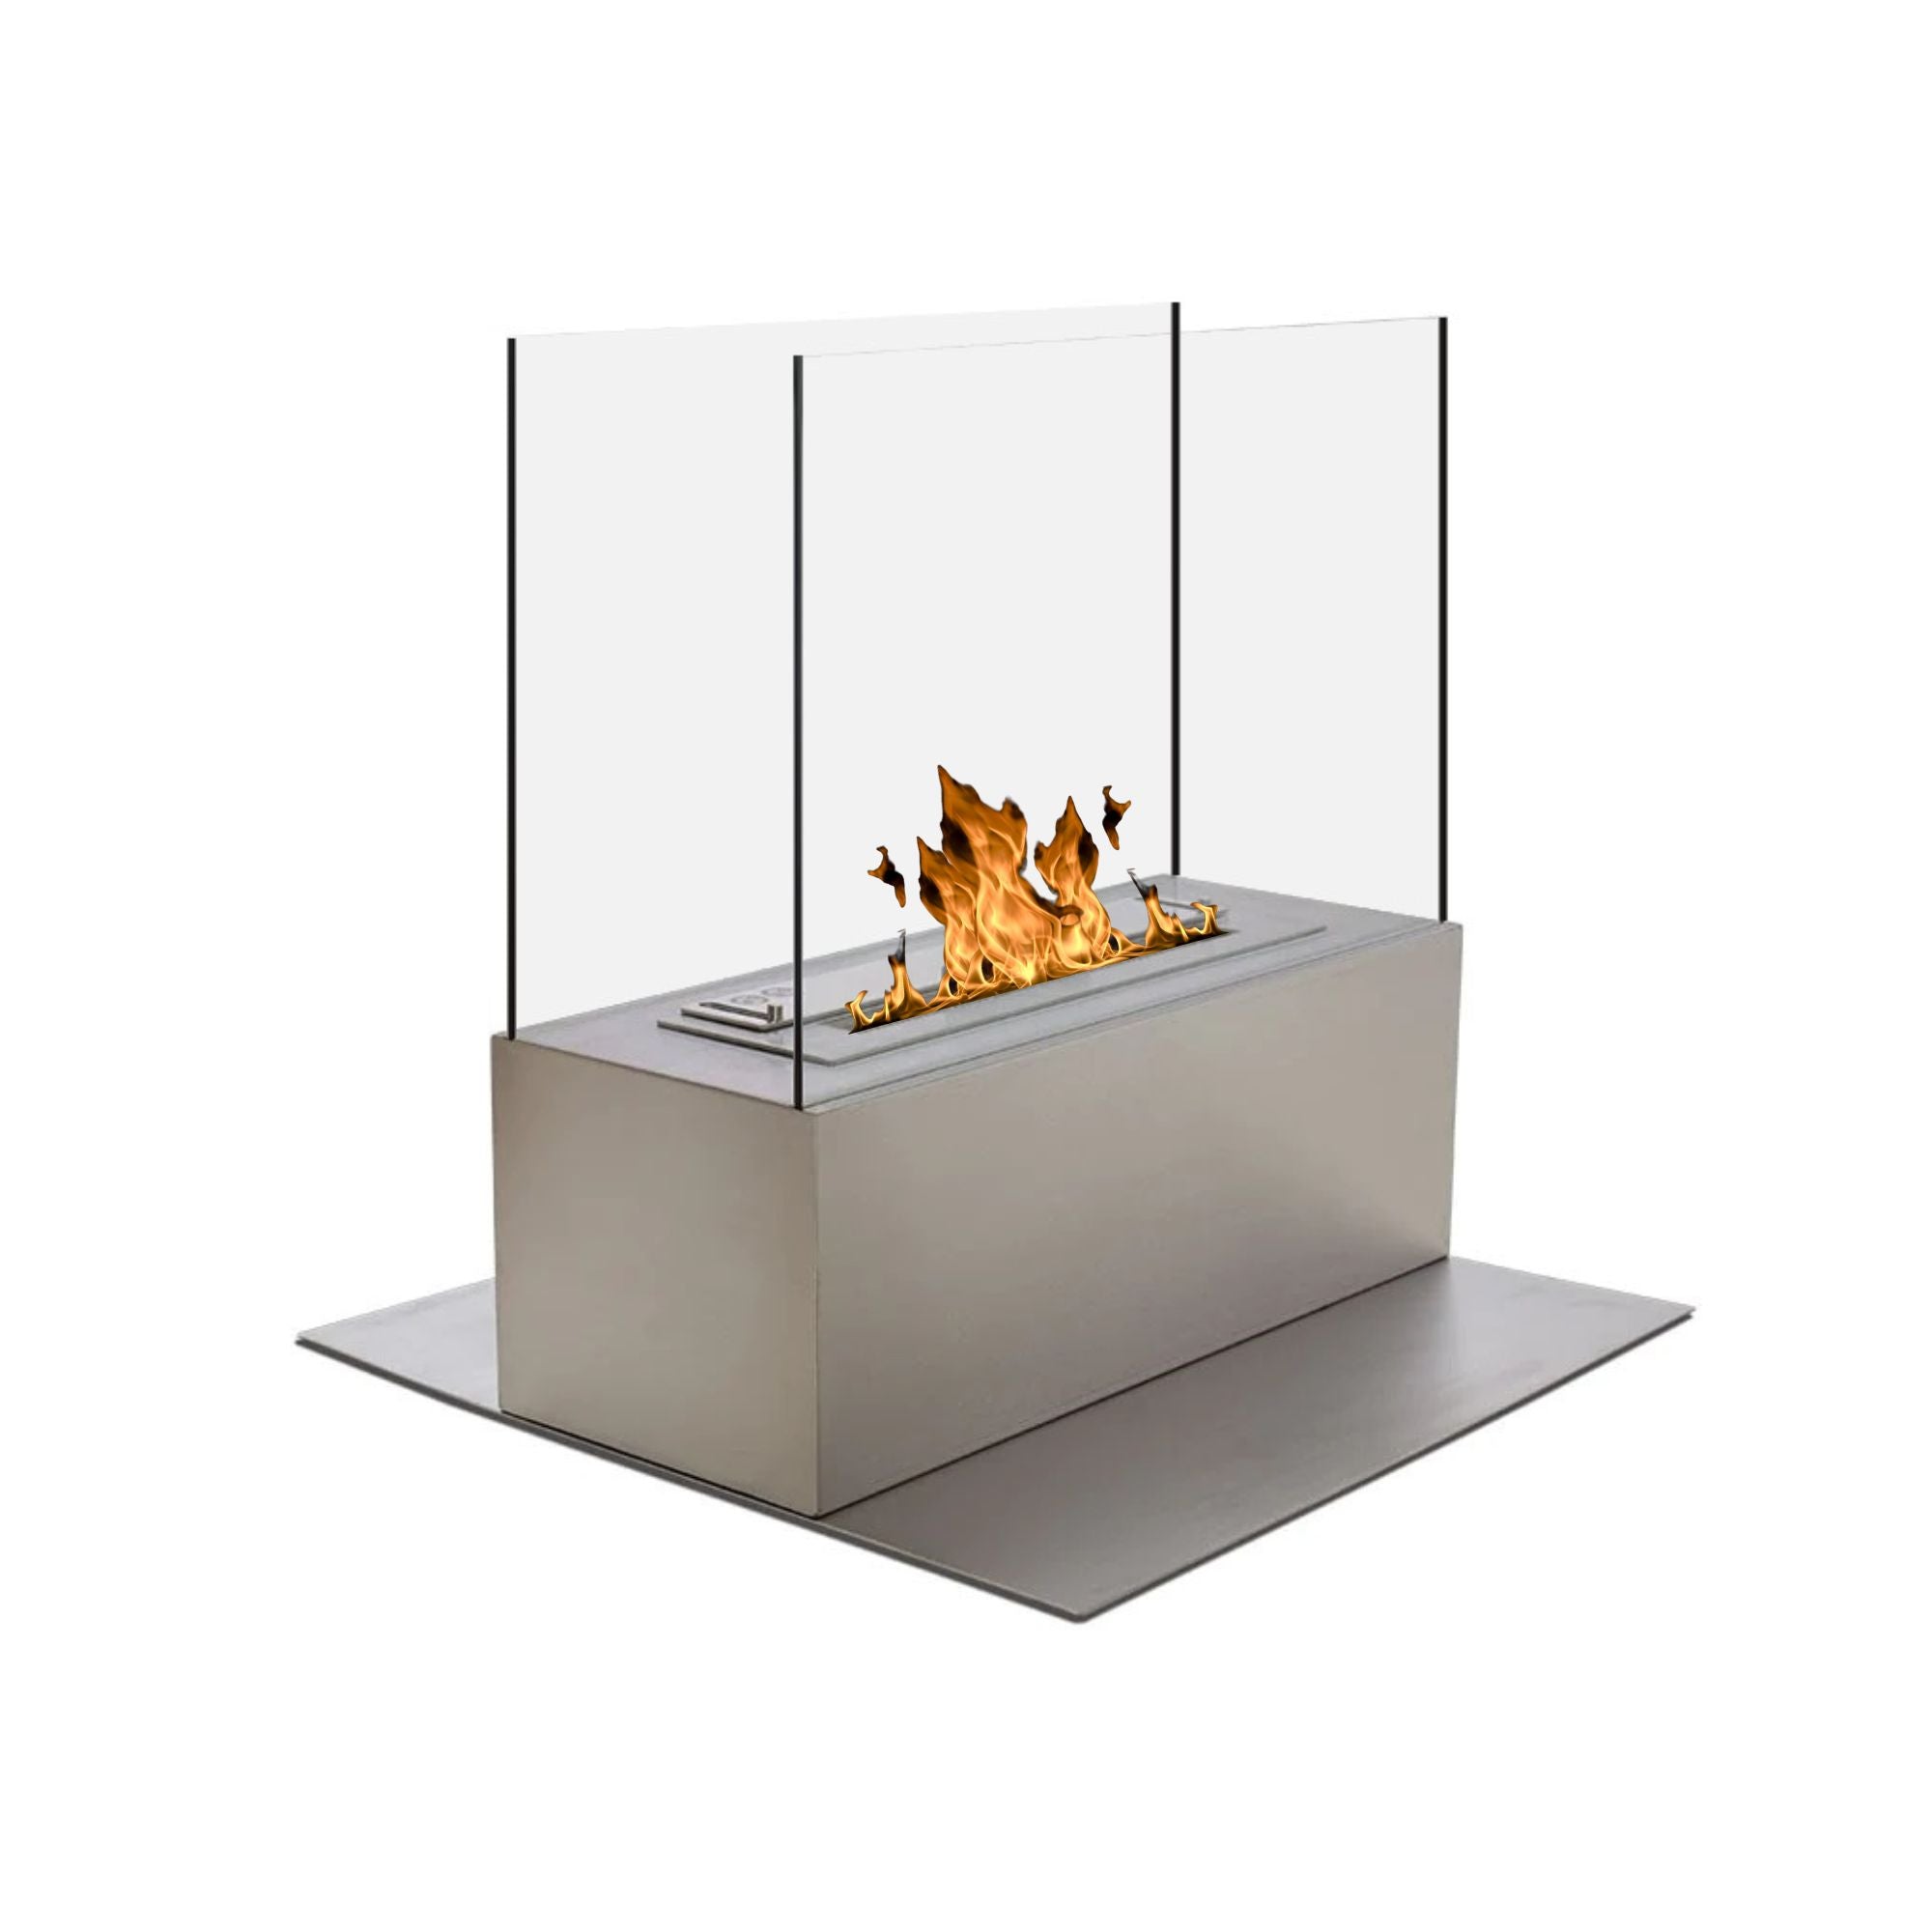 Aras stainless steel table fireplace